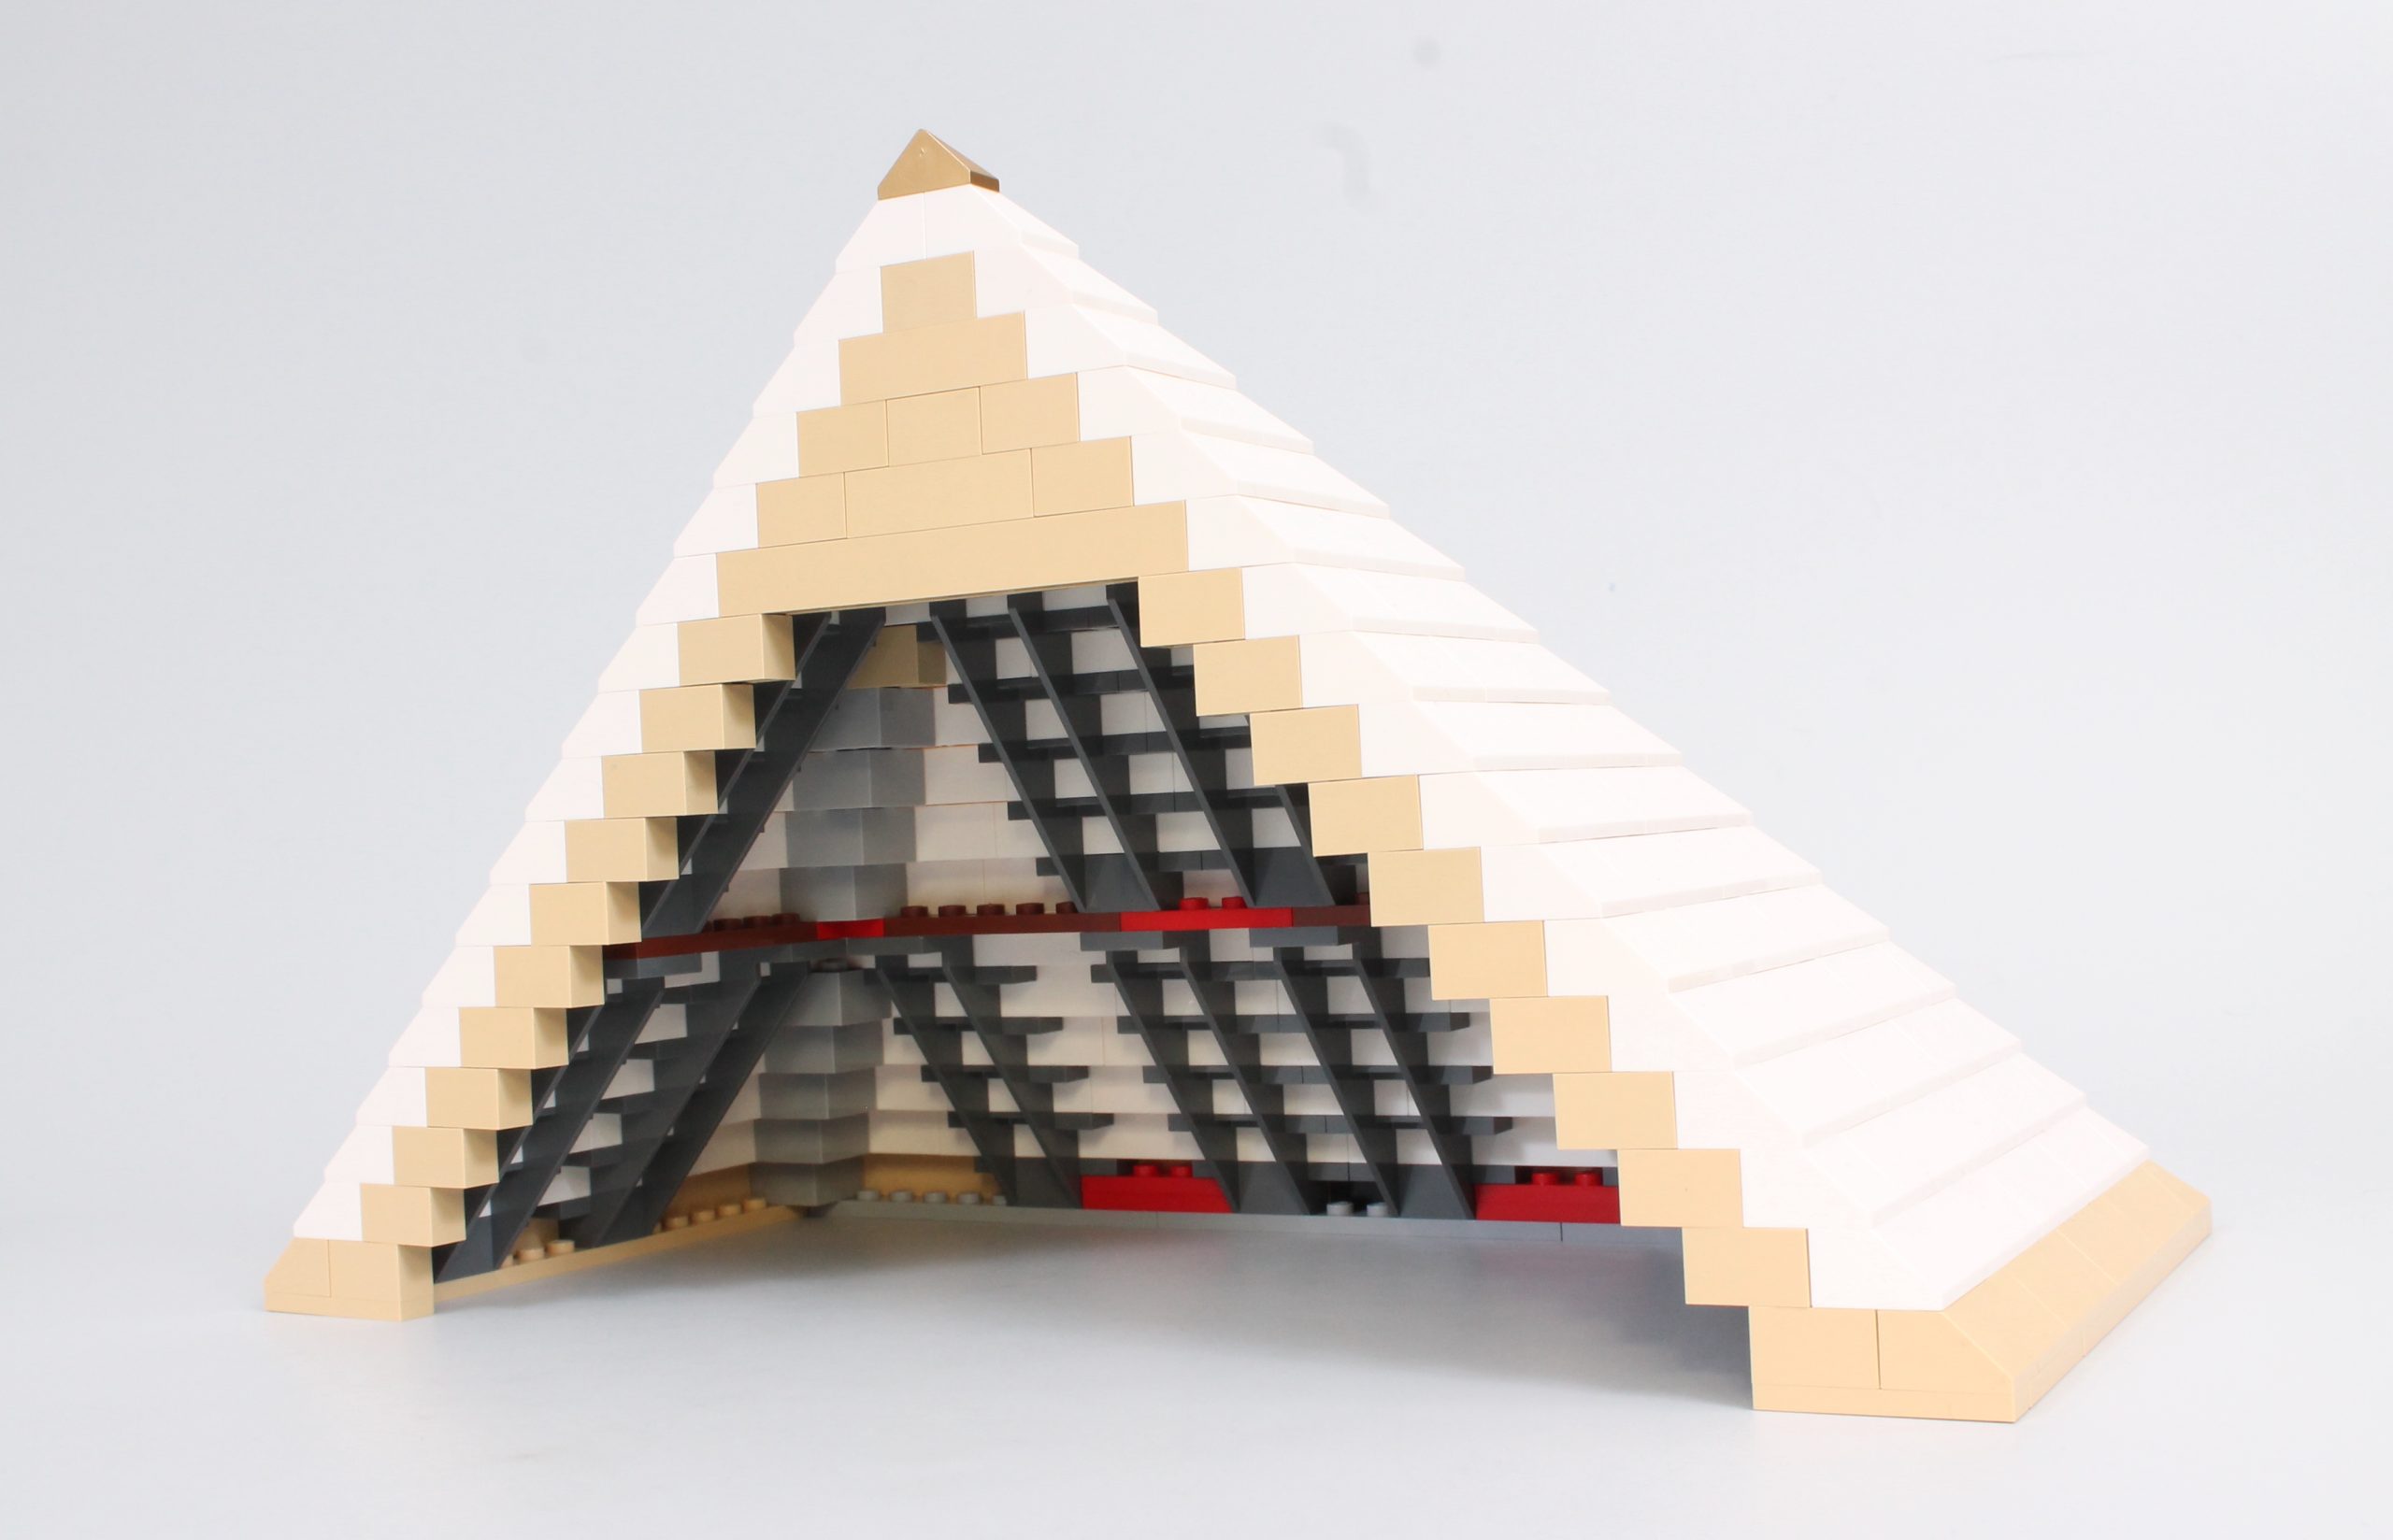 Lego Pyramid of Giza set: Where to buy, how much it costs and